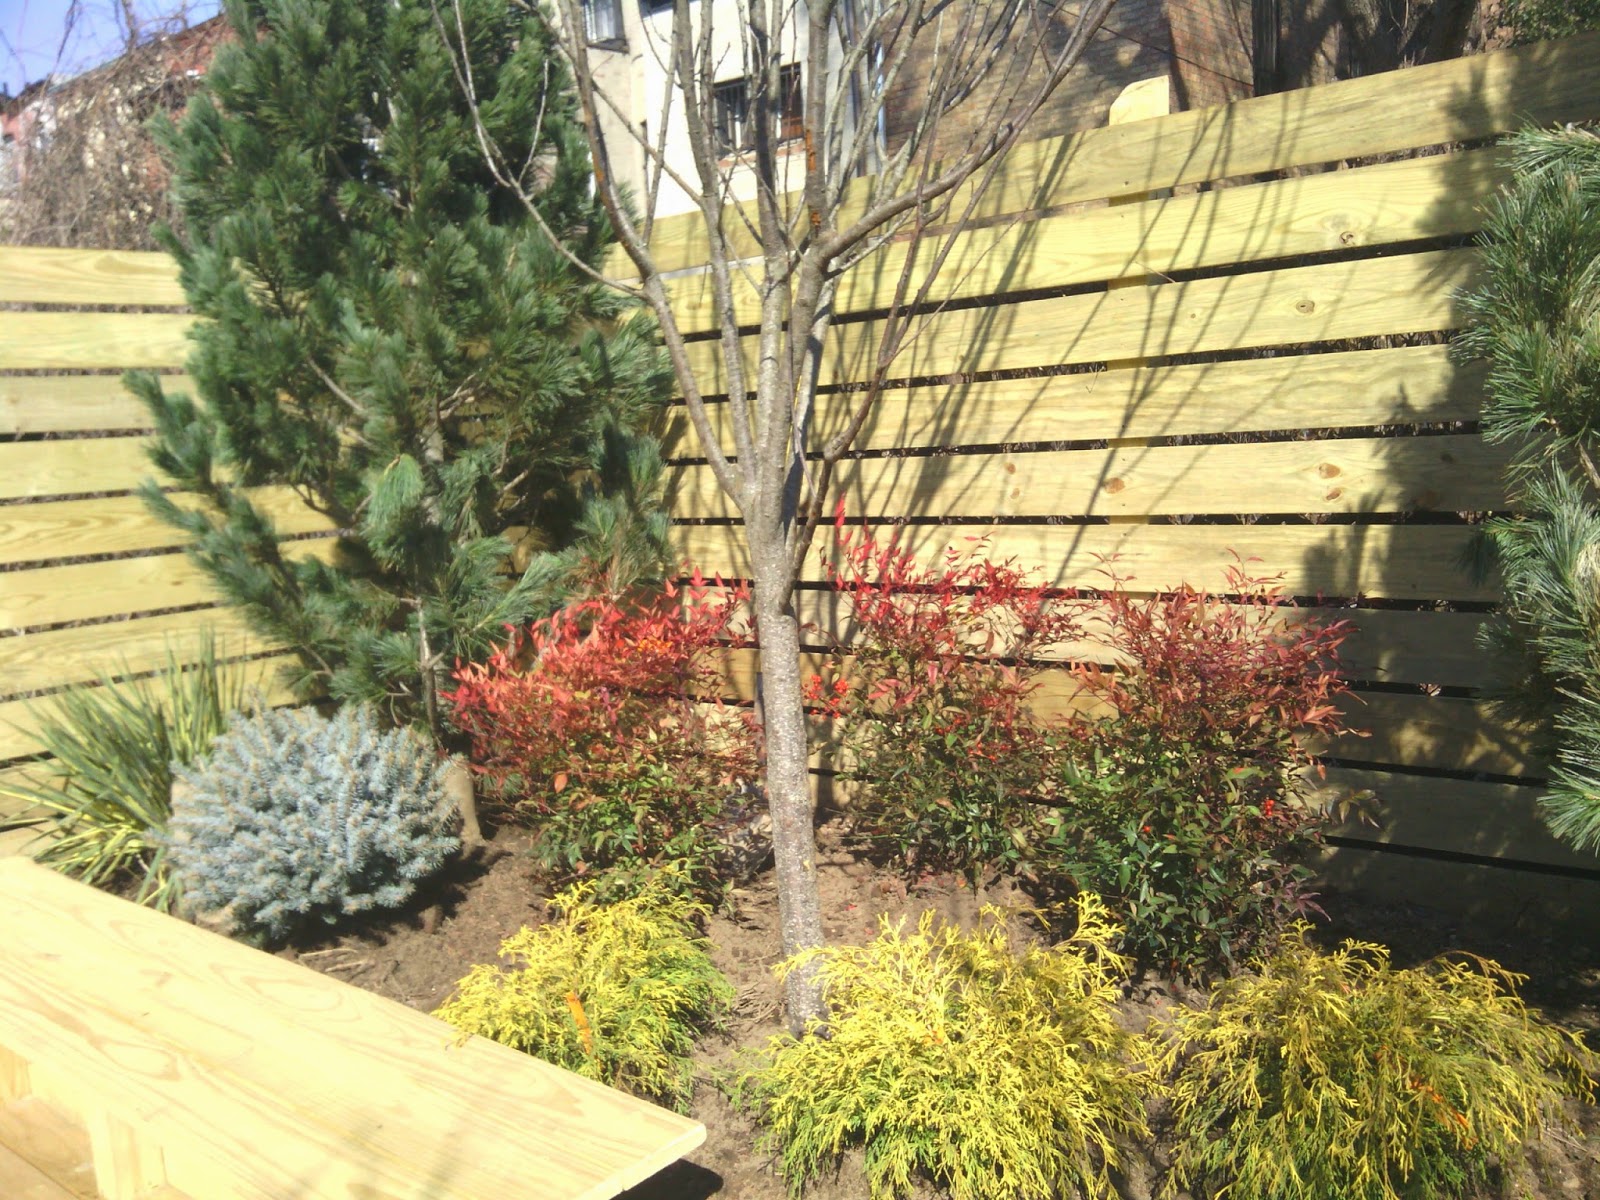 blue spruce, yellow yucca,red bamboo,custom fence builders NY,newyorkplantings,NY Plantings Garden Designers 